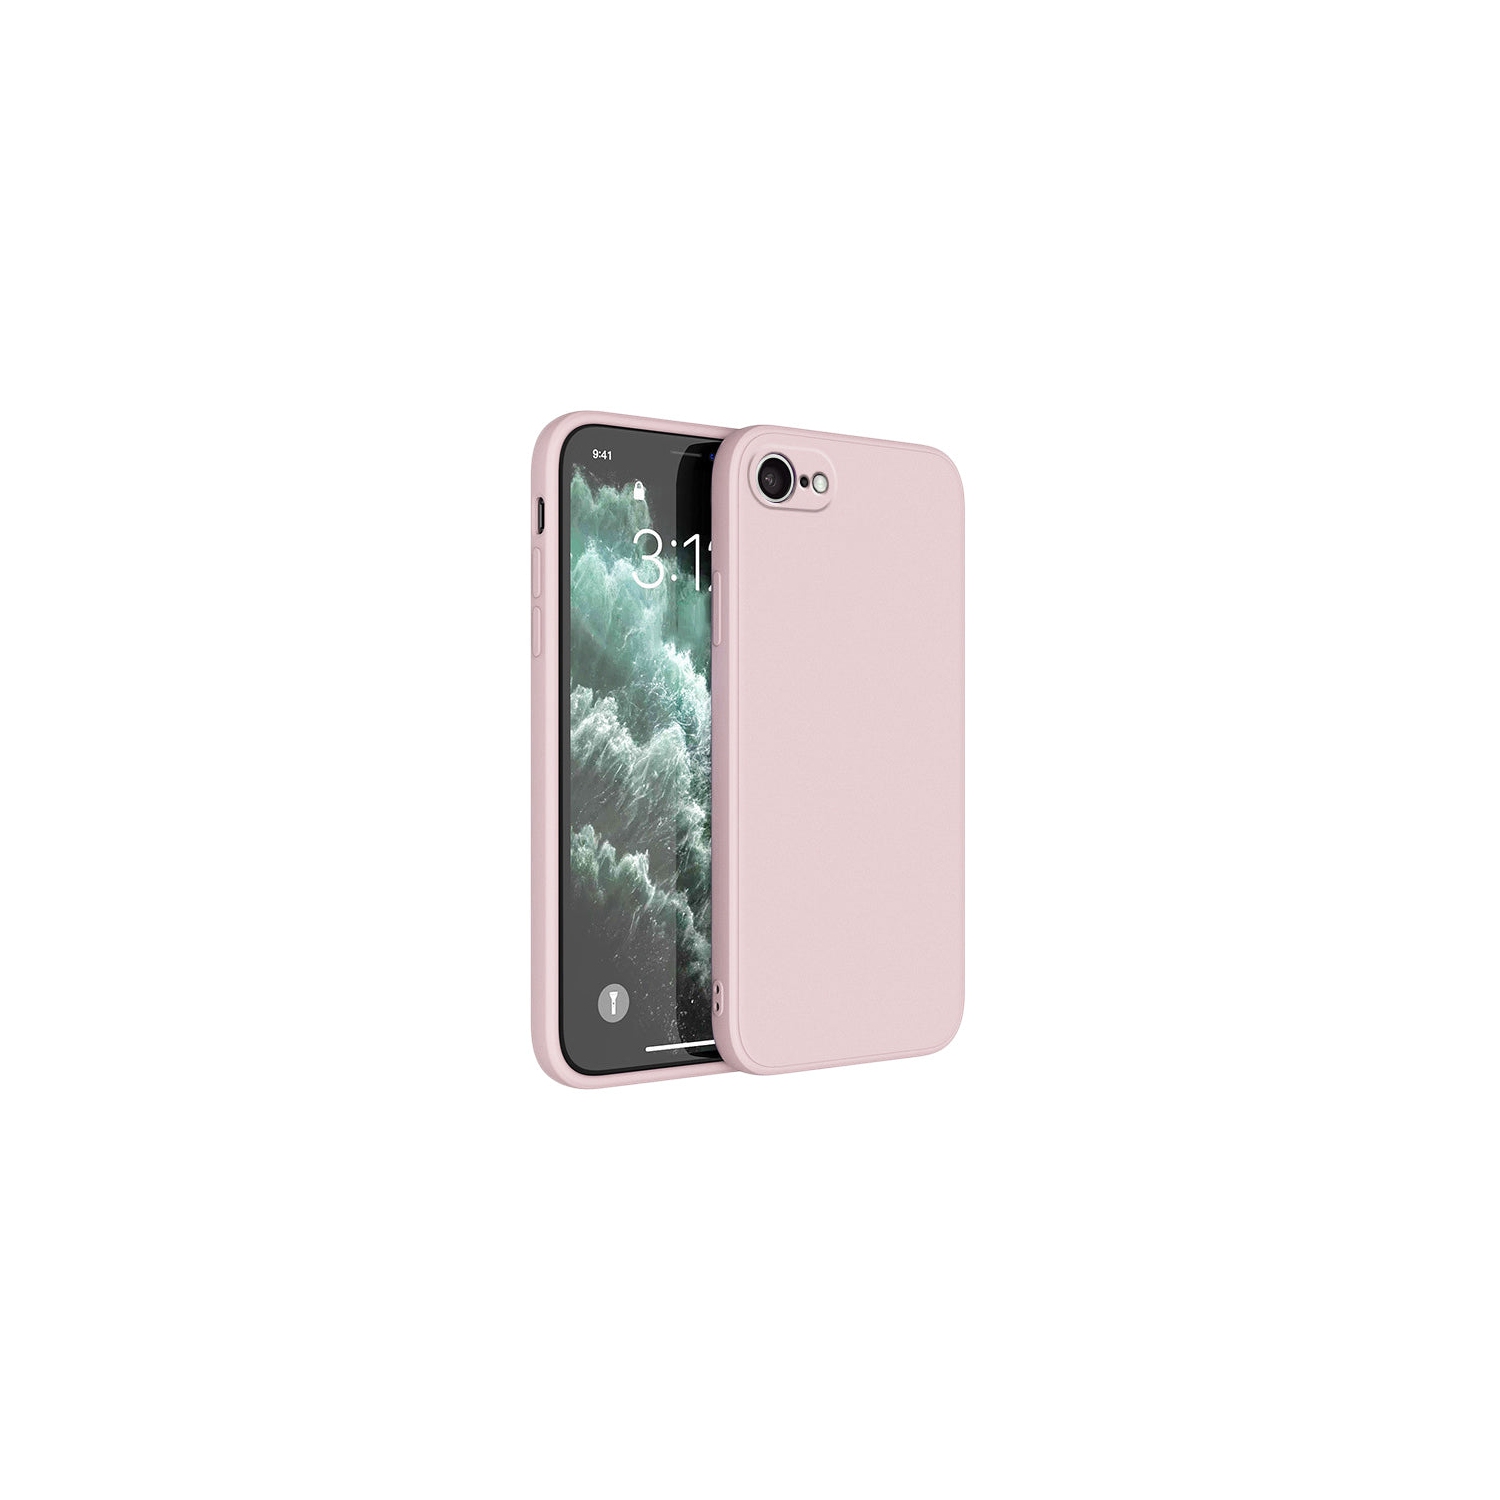 PANDACO Soft Shell Matte Pink Case for iPhone 6 or iPhone 6S